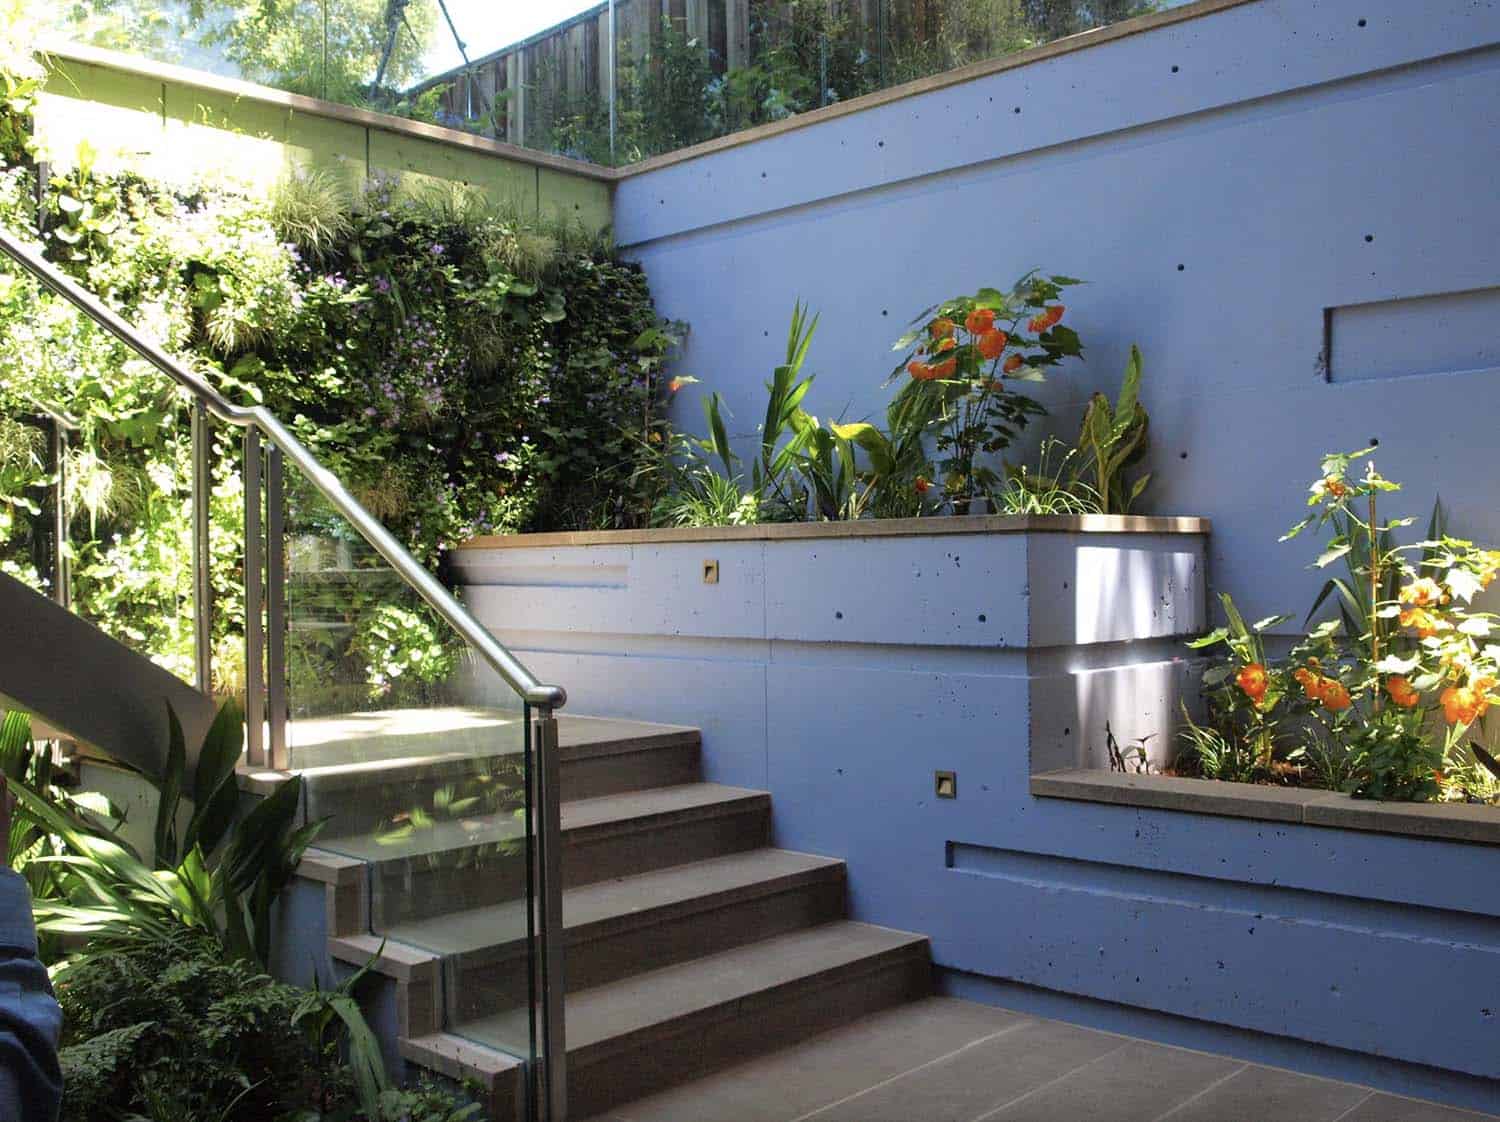 stepped, painted, concrete planters, a planted green wall + glass rail at concrete steps